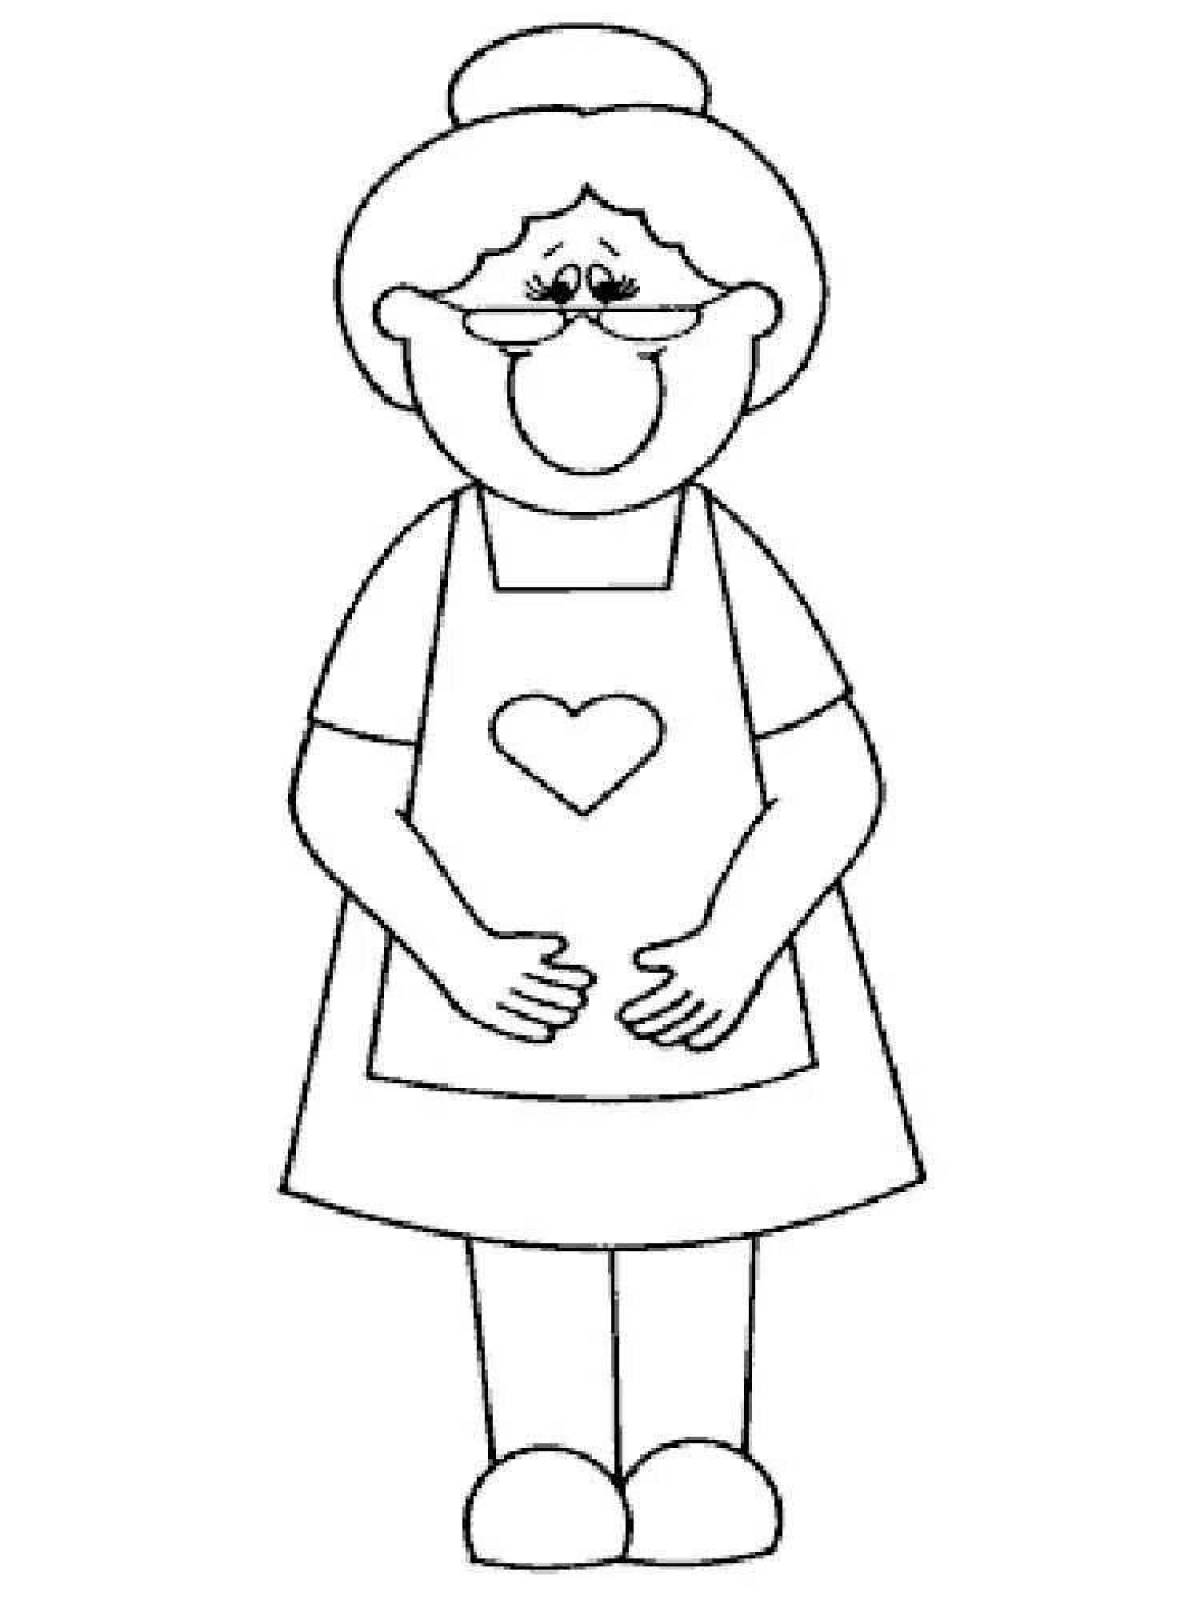 Gracious grandmother coloring page